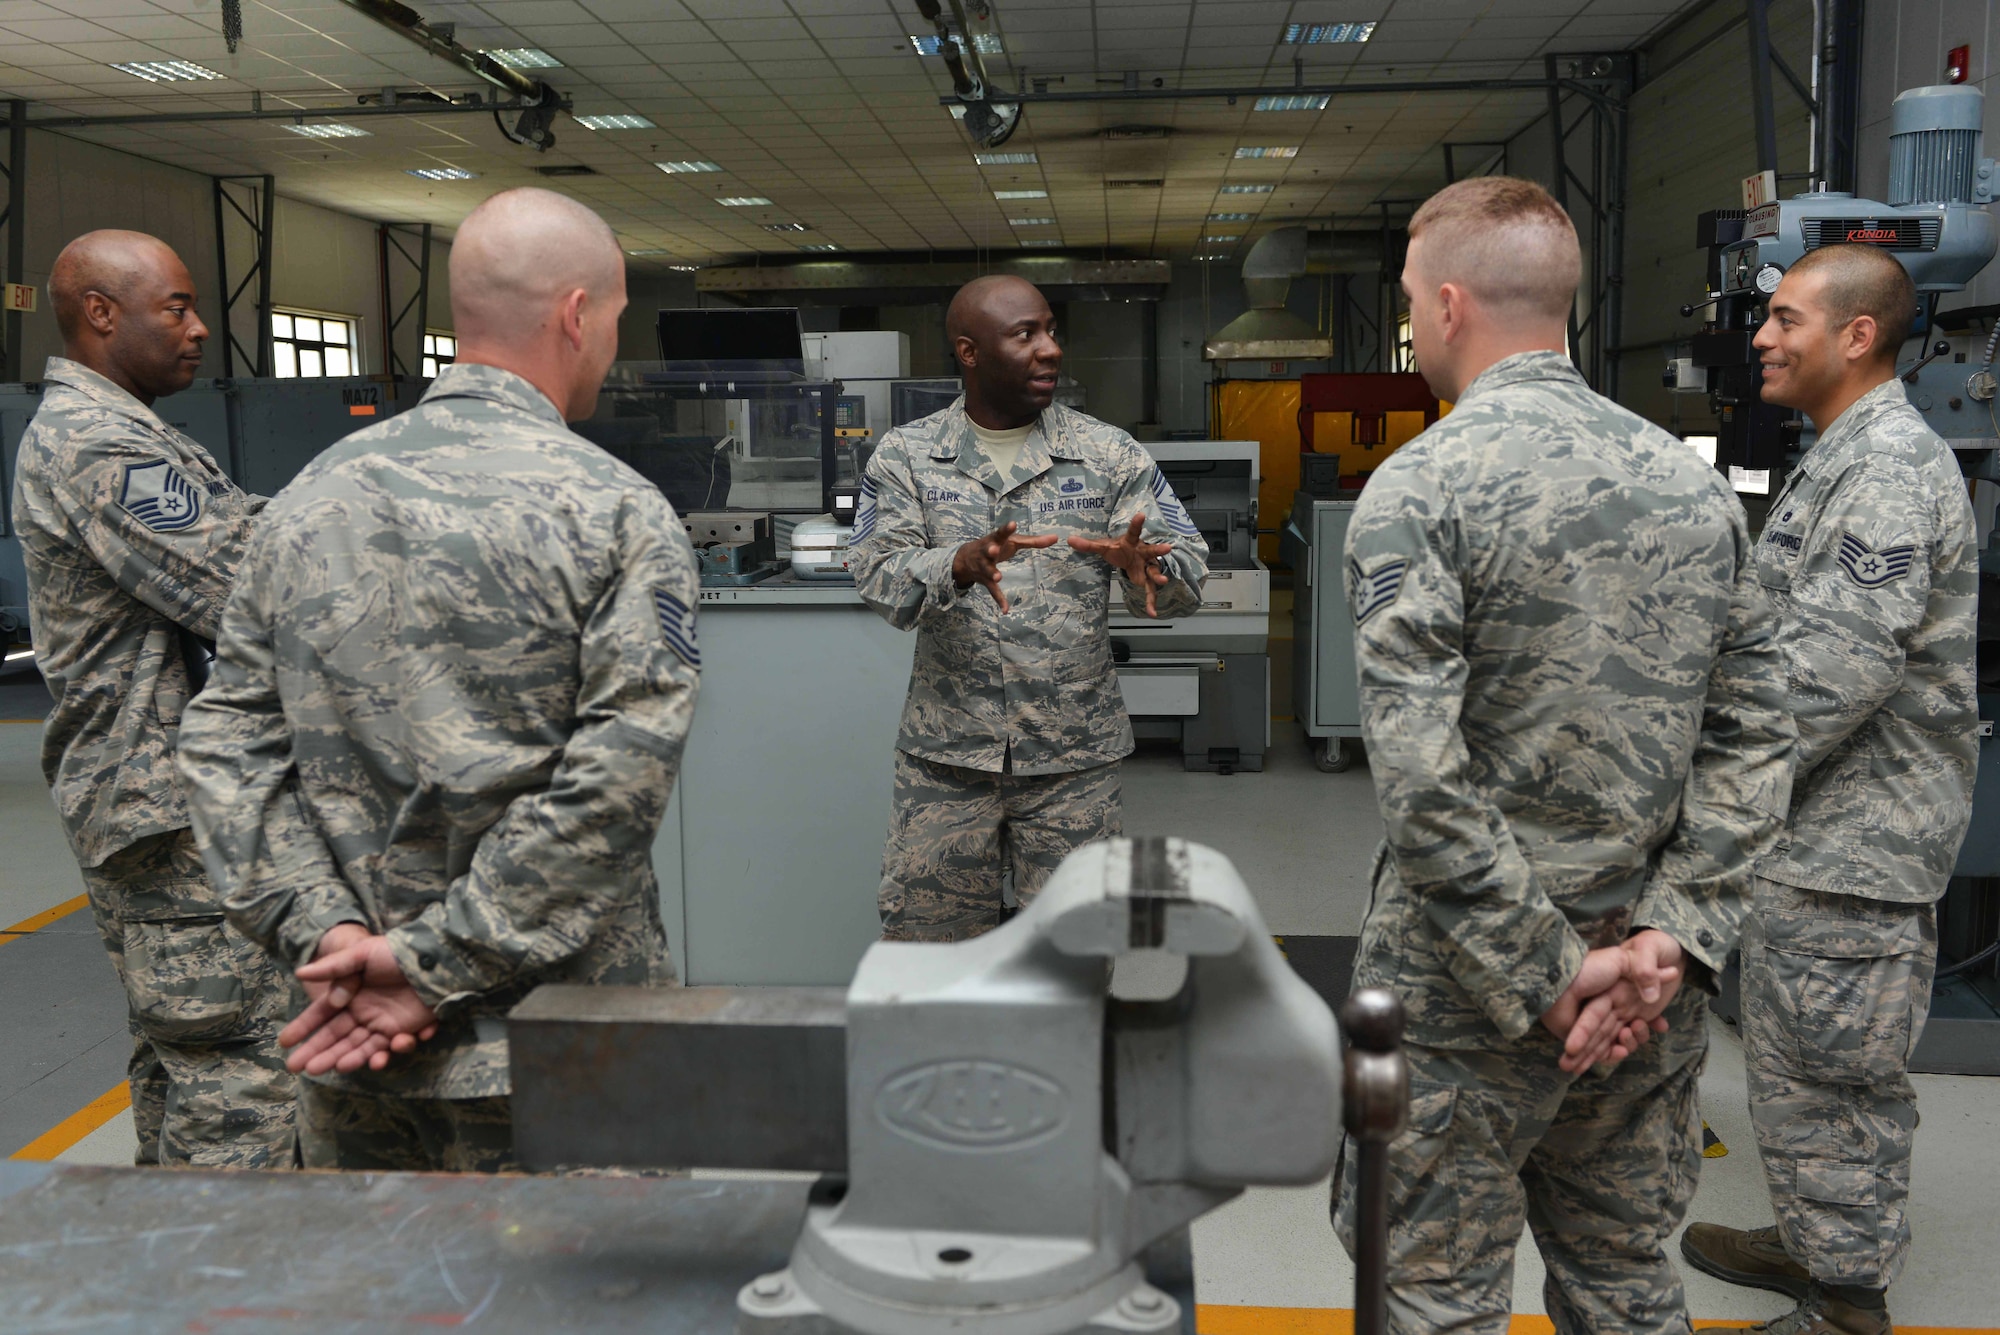 U.S. Air Force Chief Master Sgt. Vegas Clark, 39th Air Base Wing command chief, speaks to 39th Maintenance Squadron Airmen June 22, 2016, at Incirlik Air Base, Turkey. Clark visited the 39th MXS to learn more about their daily operations and tasks. (U.S. Air Force photo by Senior Airman John Nieves Camacho/Released)